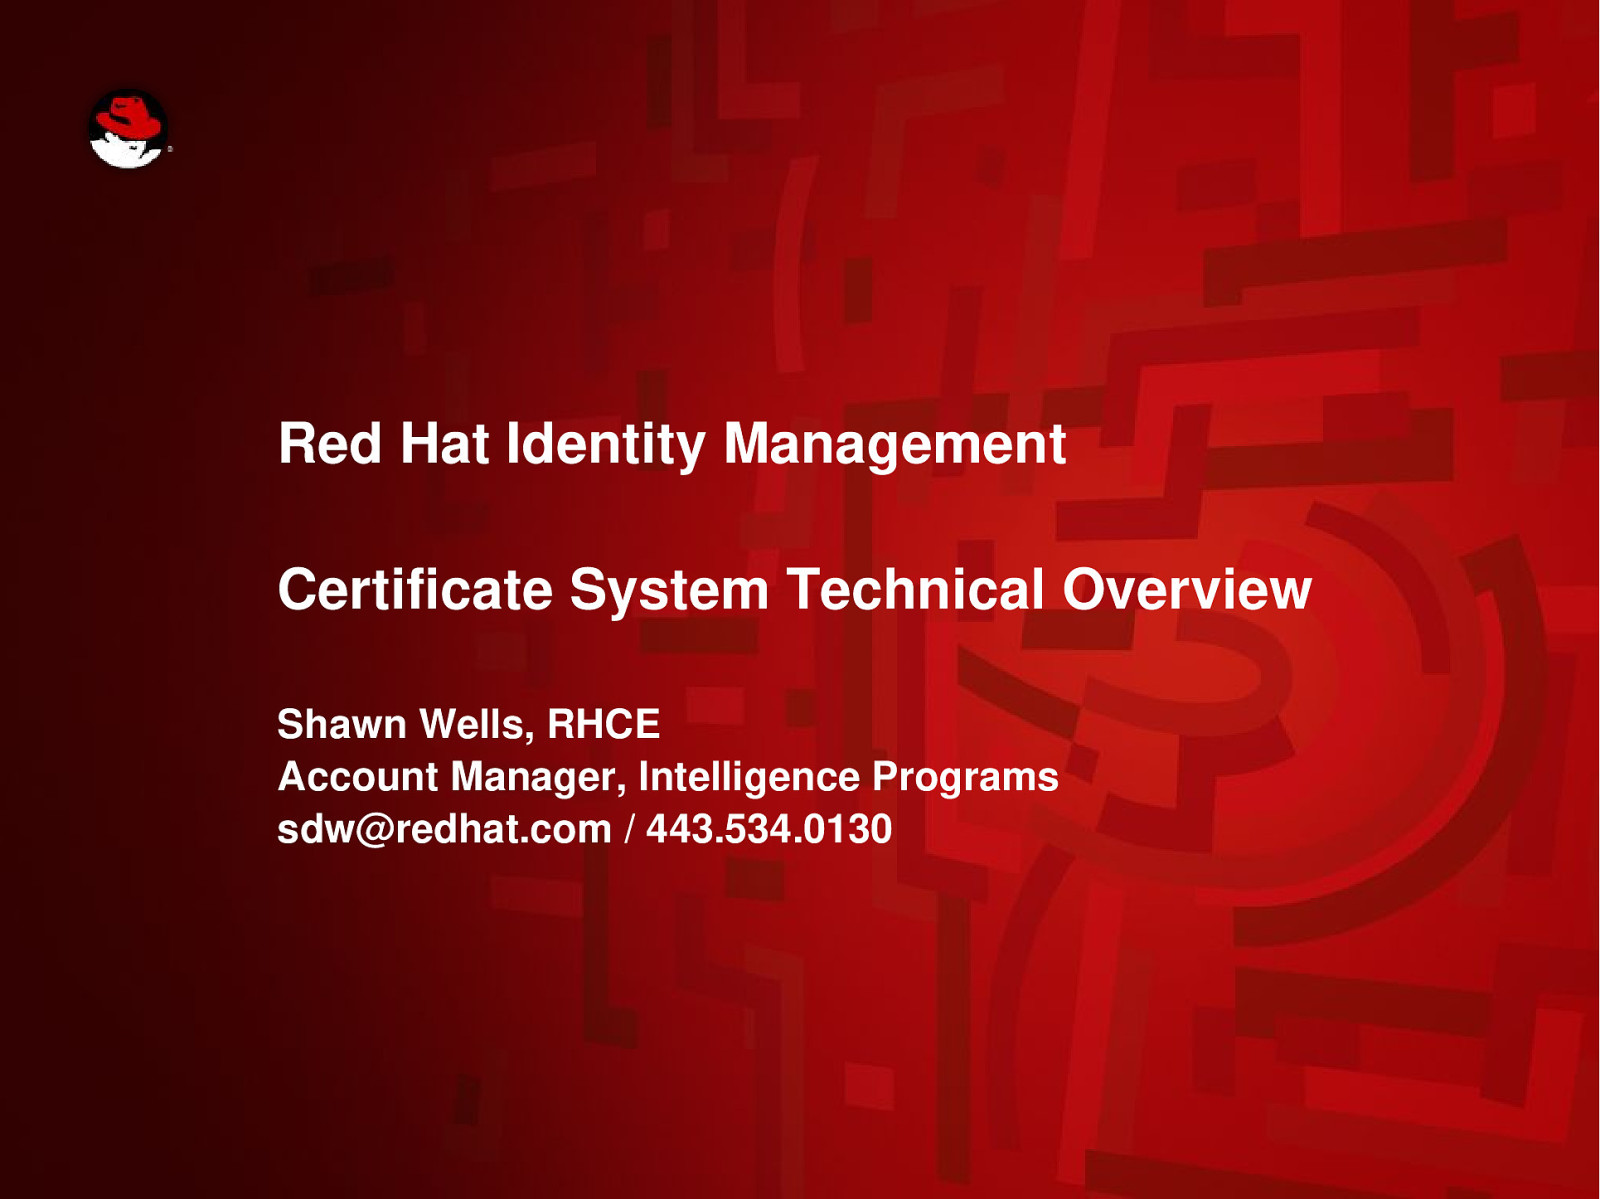 Red Hat Identity Management & Certificate System Technical Overview